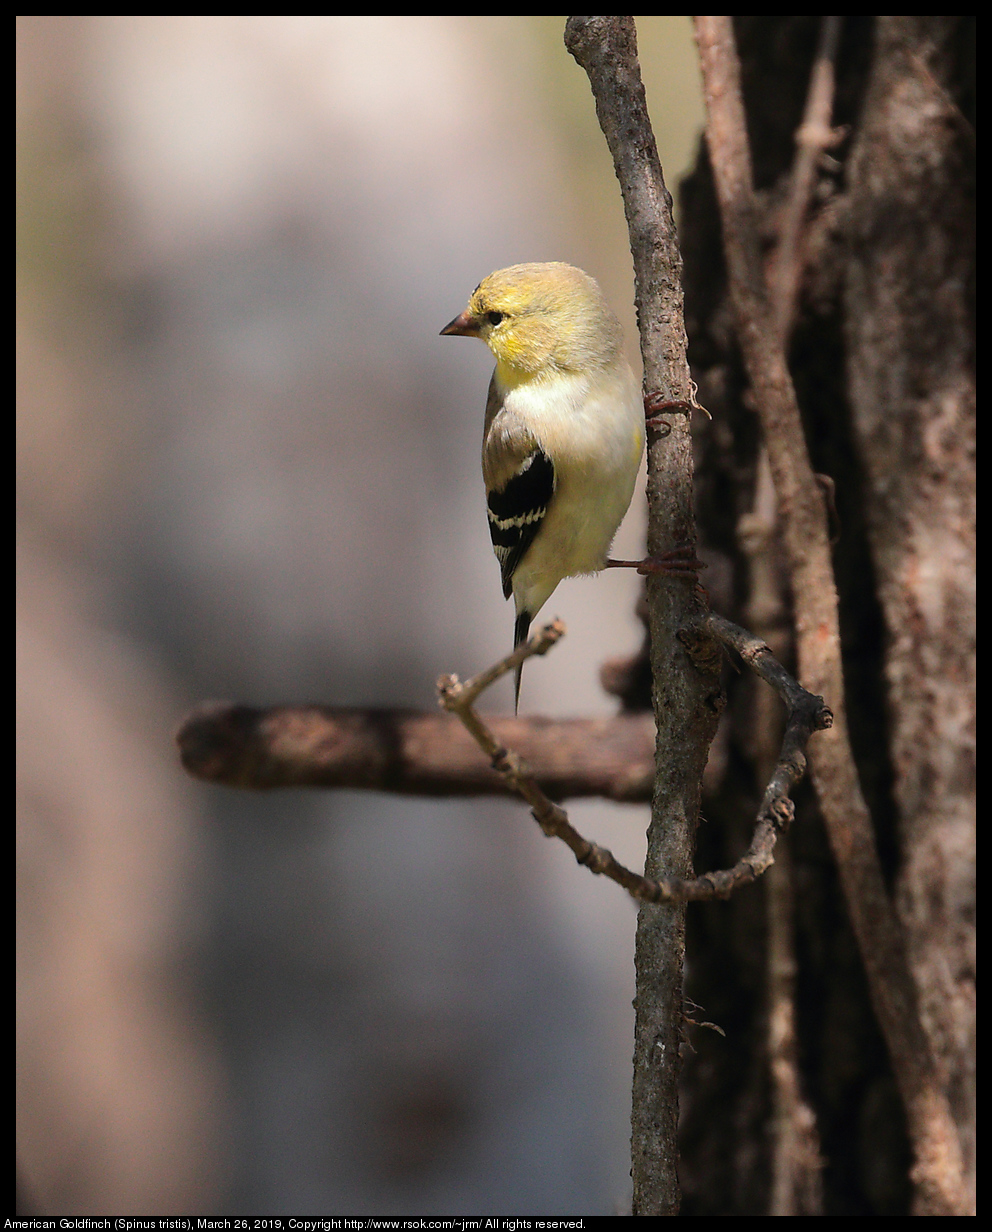 American Goldfinch (Spinus tristis), March 26, 2019